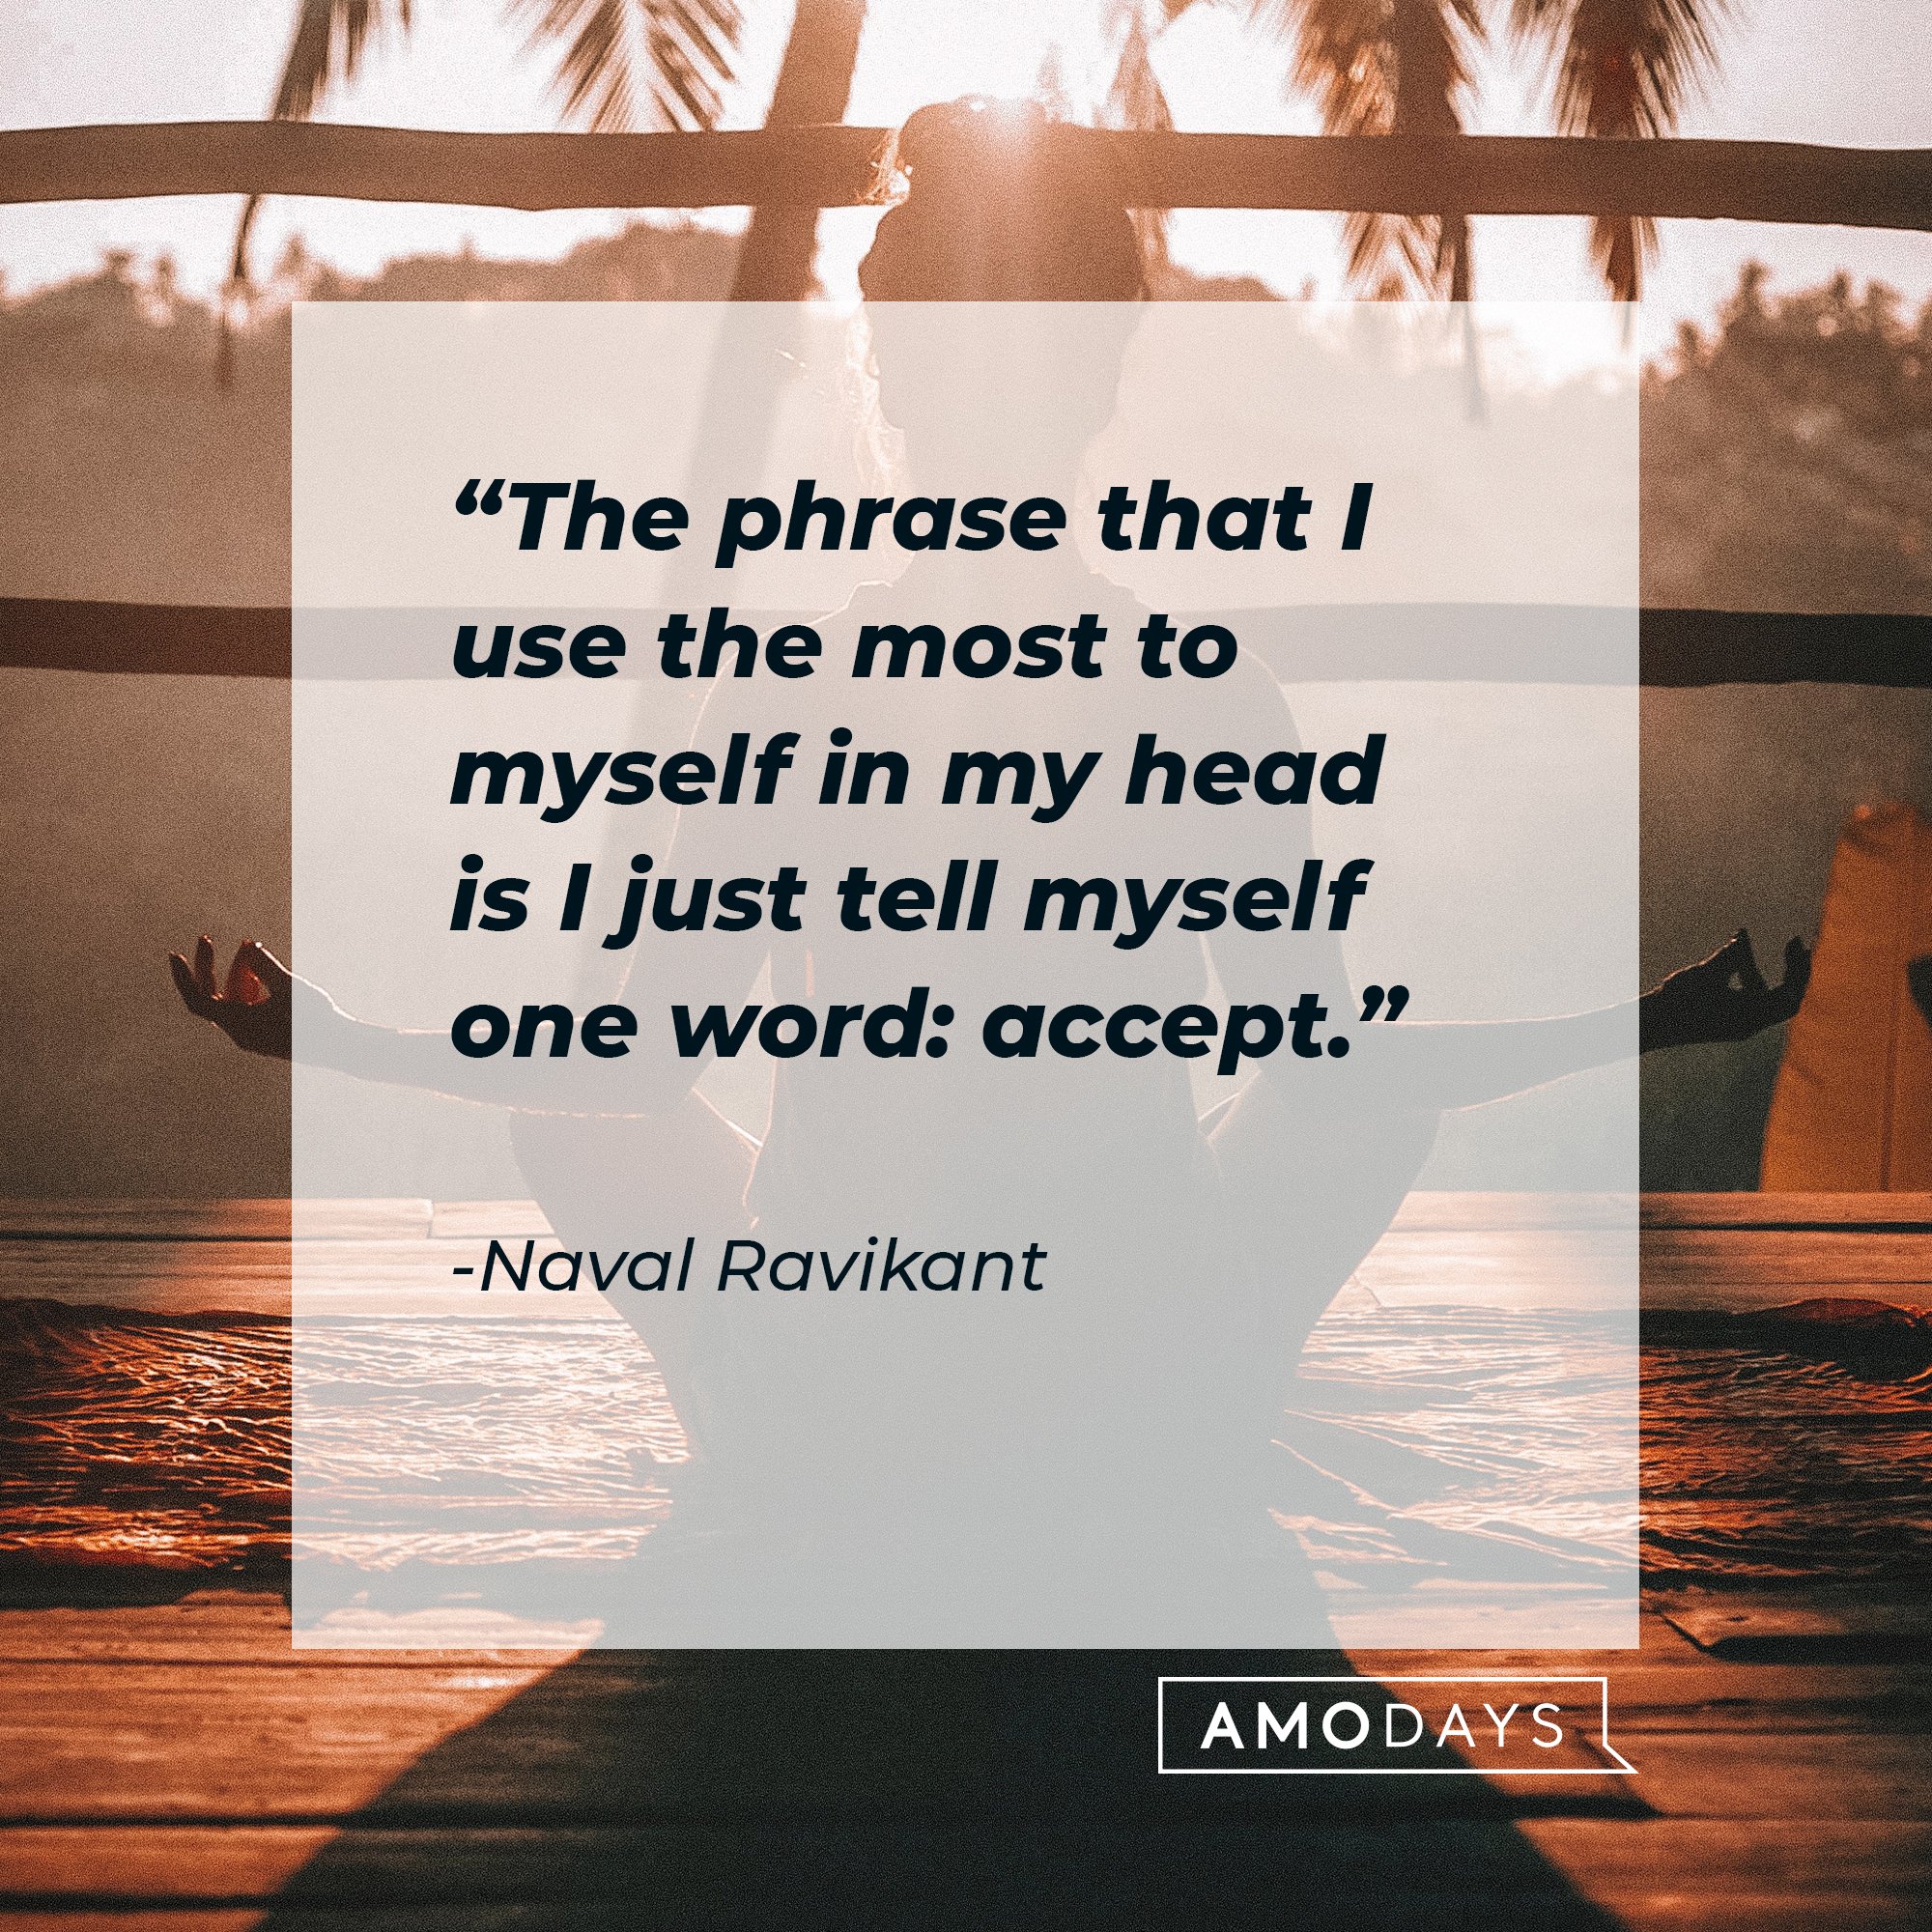 Naval Ravikant's quote: "The phrase that I use the most to myself in my head is I just tell myself one word: accept." | Image: AmoDays